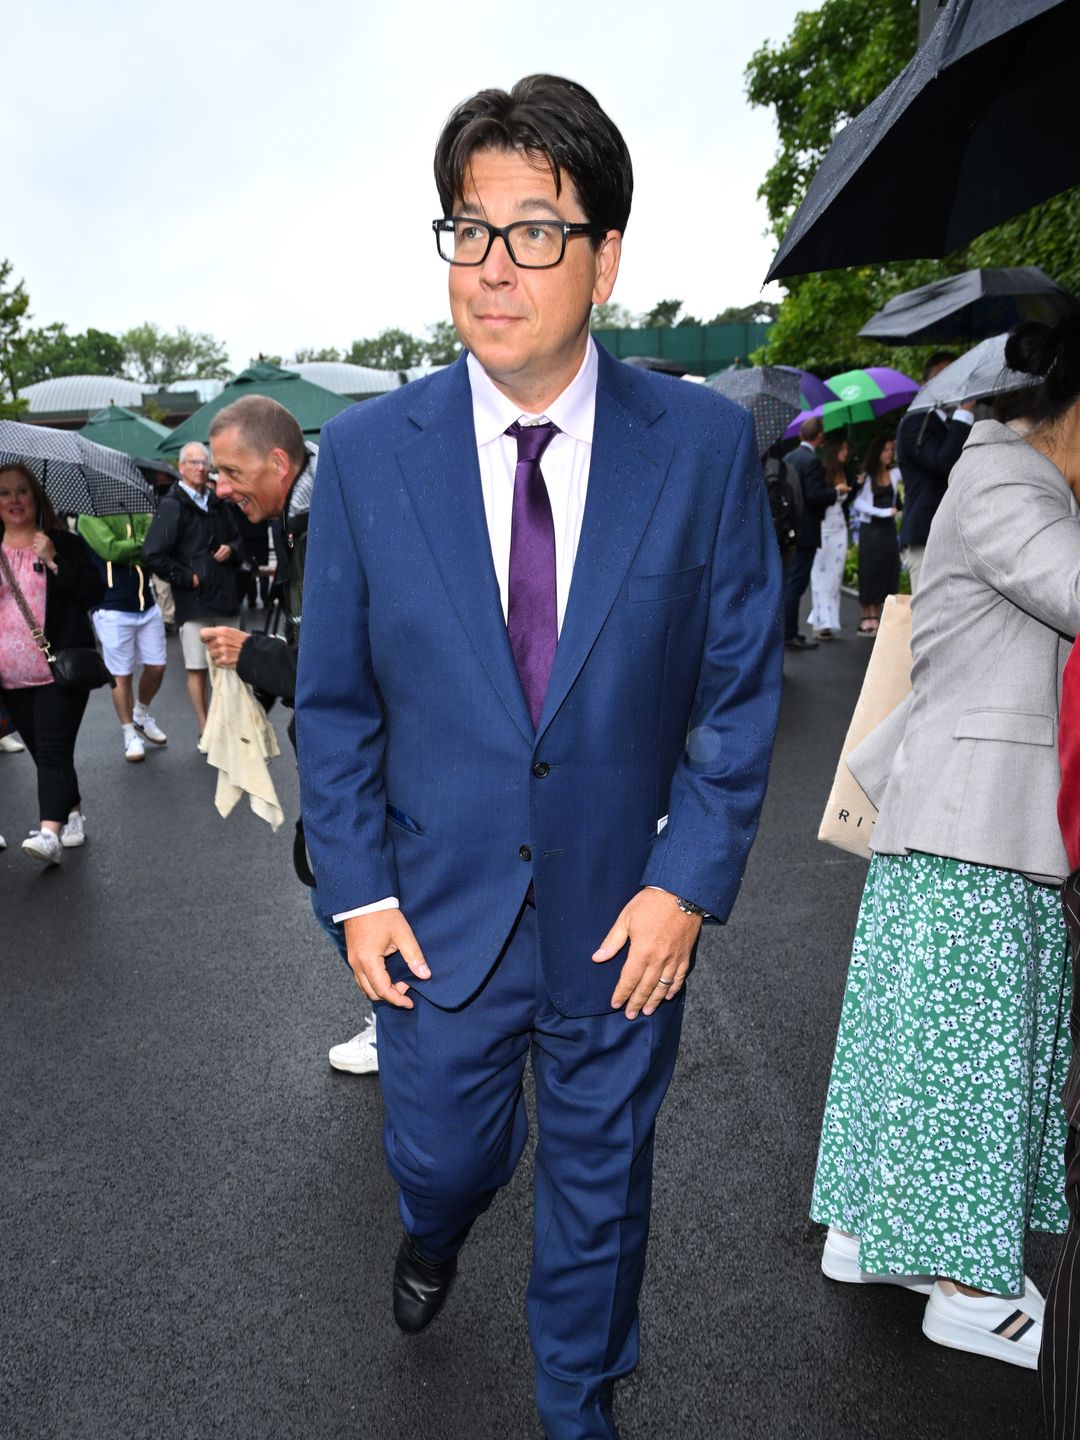 Michael McIntyre in blue suit at wimbledon